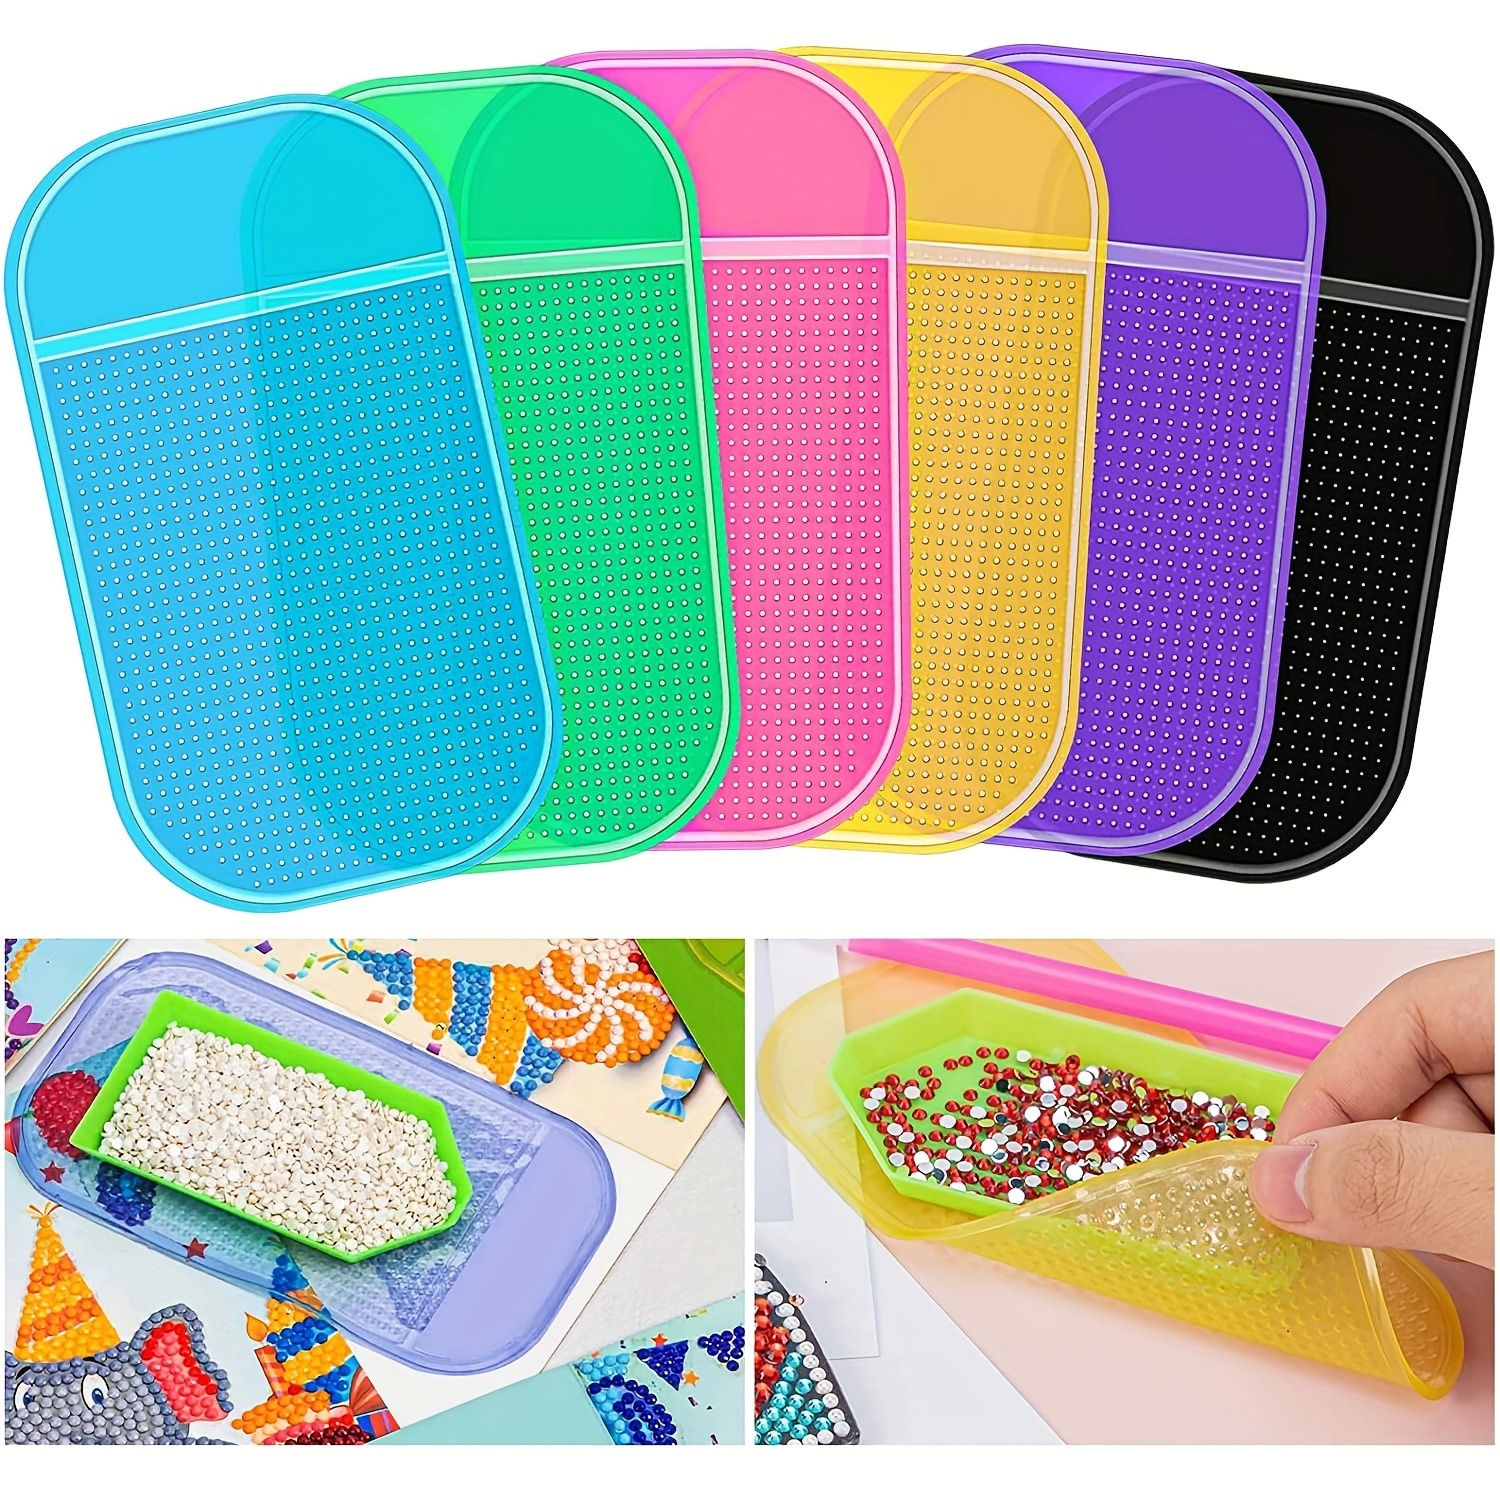 

6pcs Diamond Art Anti-slip Tools Sticky Mat For Diamond Painting Sticky Gel Pad Non-slip Universal Mount Holder 5.6 X 3.3 Inch For Holding Tray 5d Diamond Embroidery Accessories For Adults